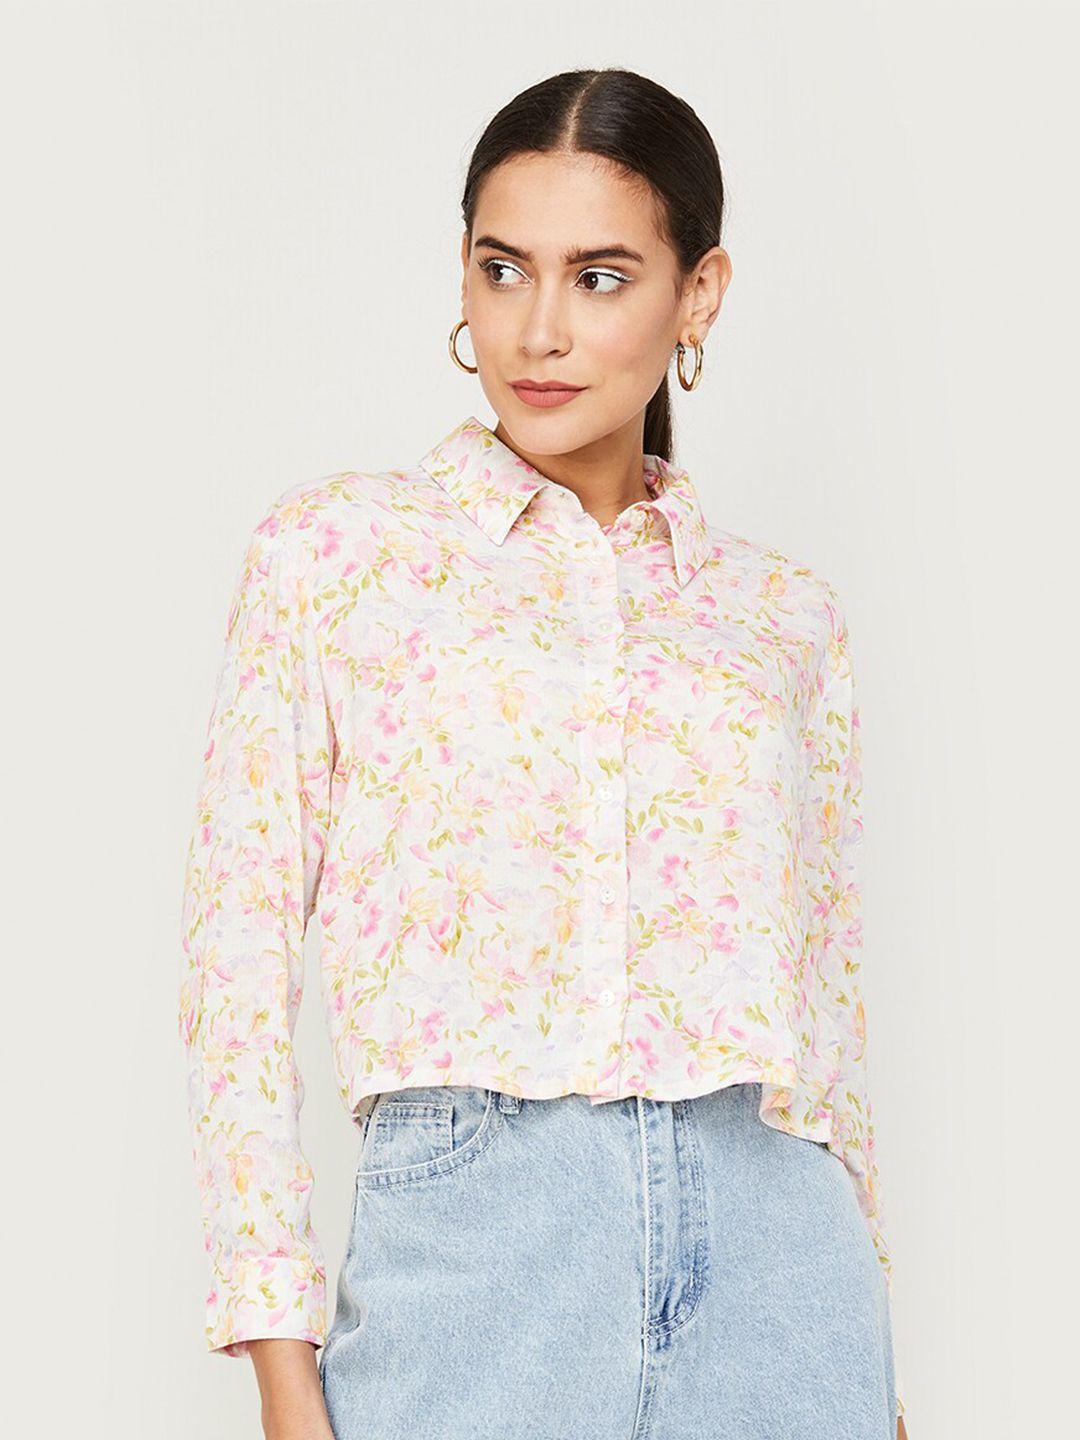 Ginger by Lifestyle Floral Printed Shirt Style Top